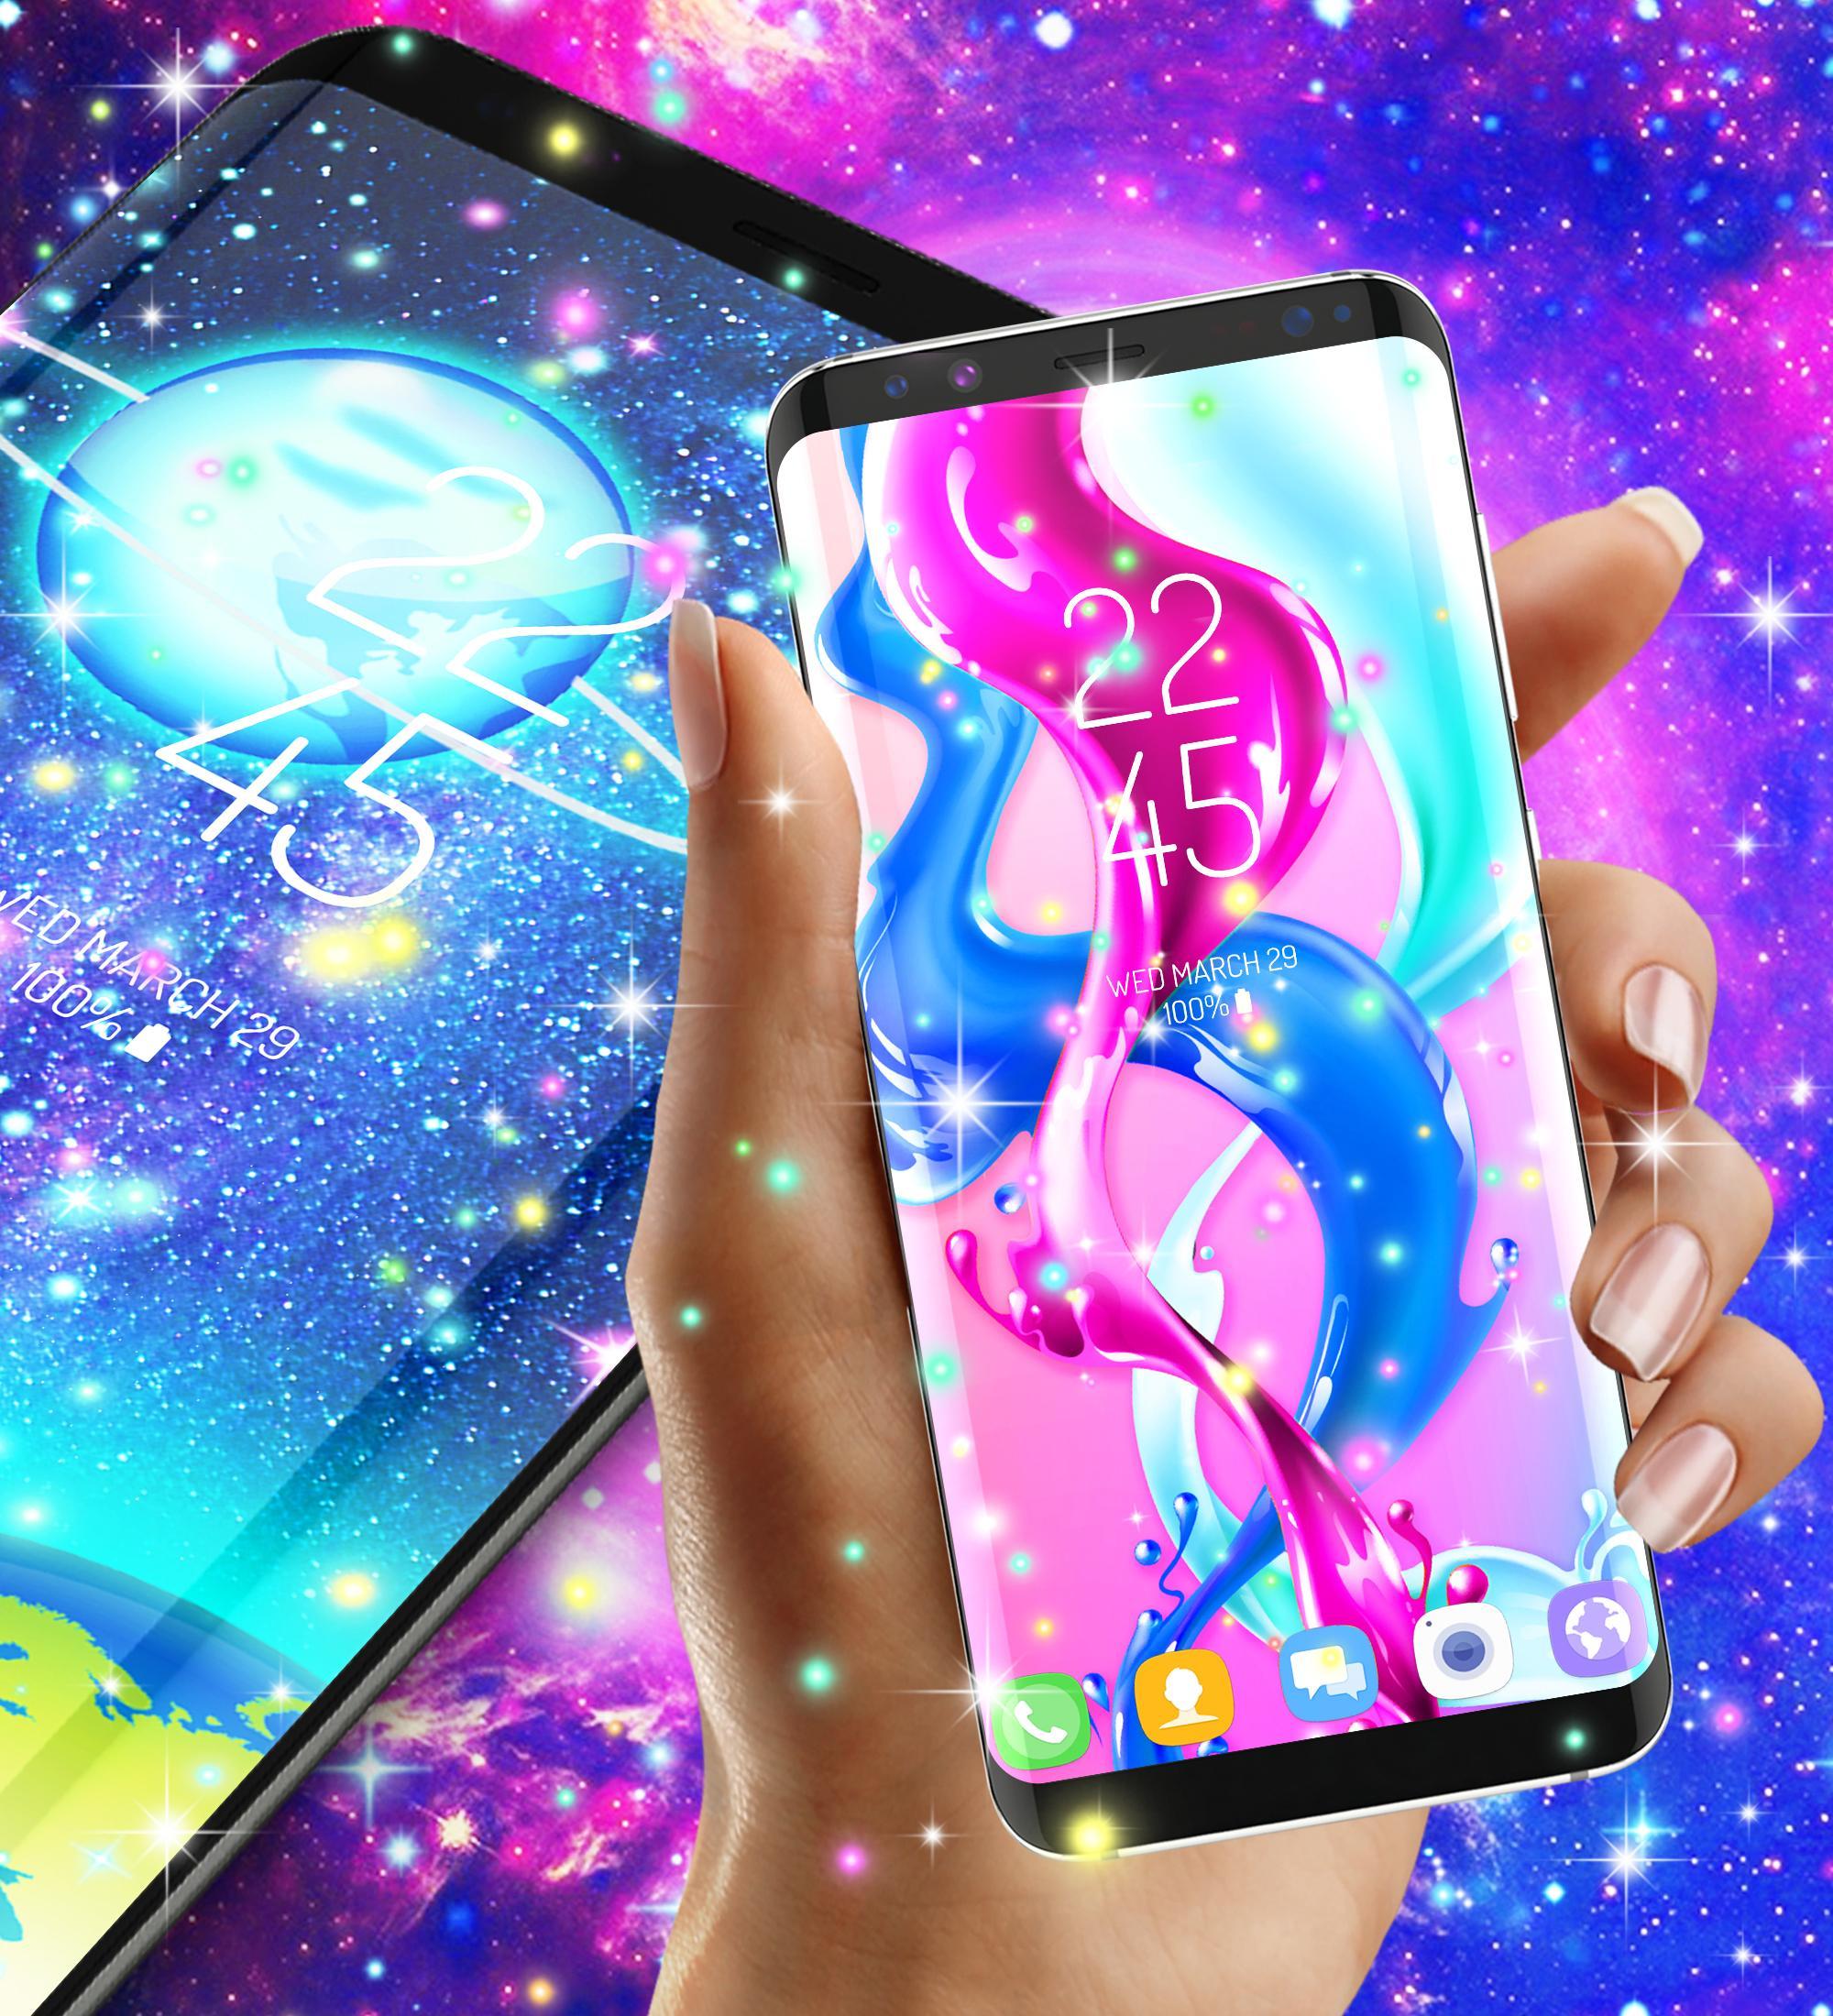 Live wallpapers for galaxy s9 for Android - APK Download